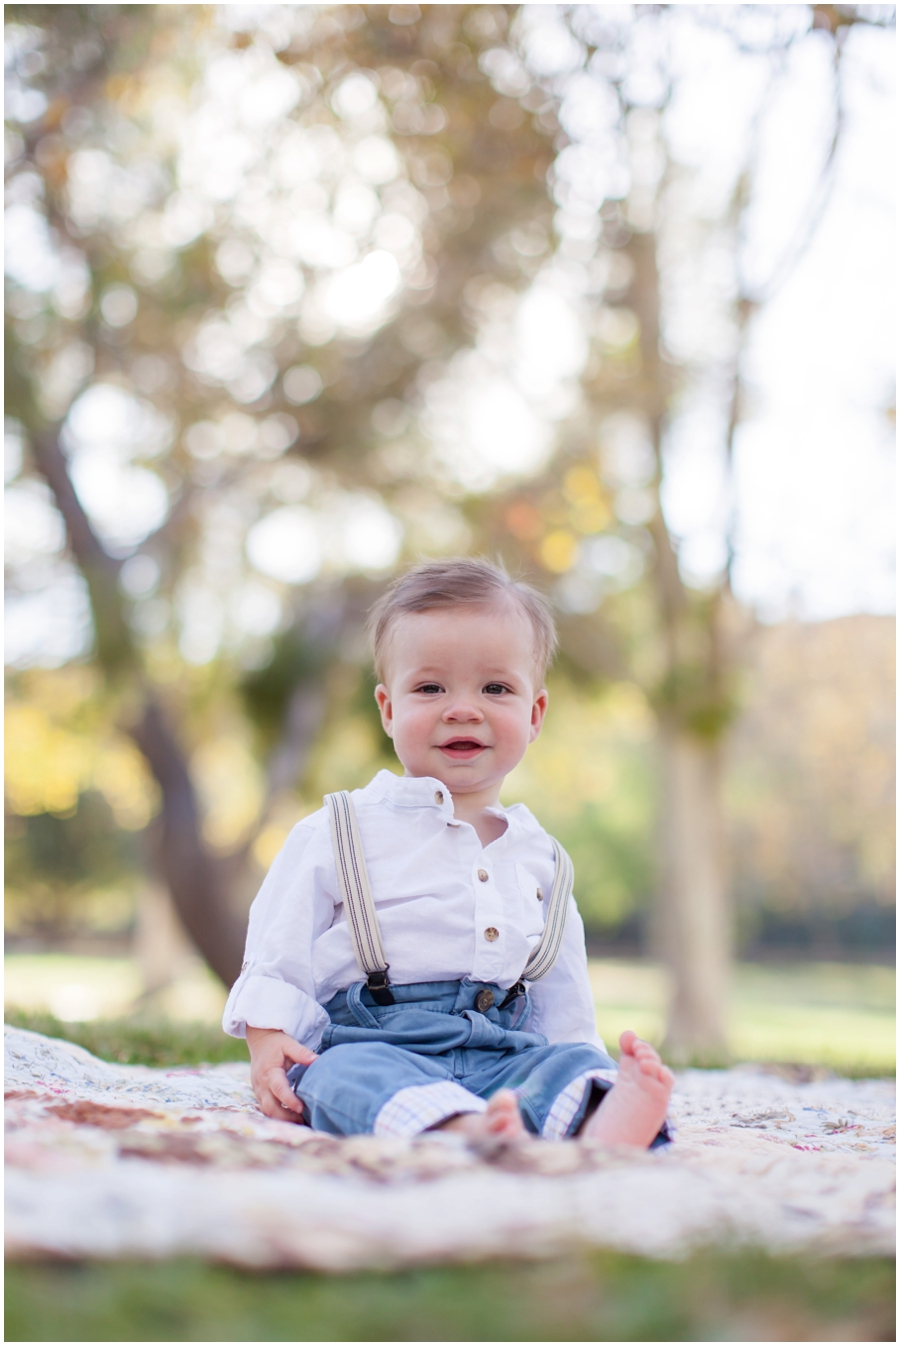 Declan’s 8 Month Old Portraits at the Park | Just Maggie ...